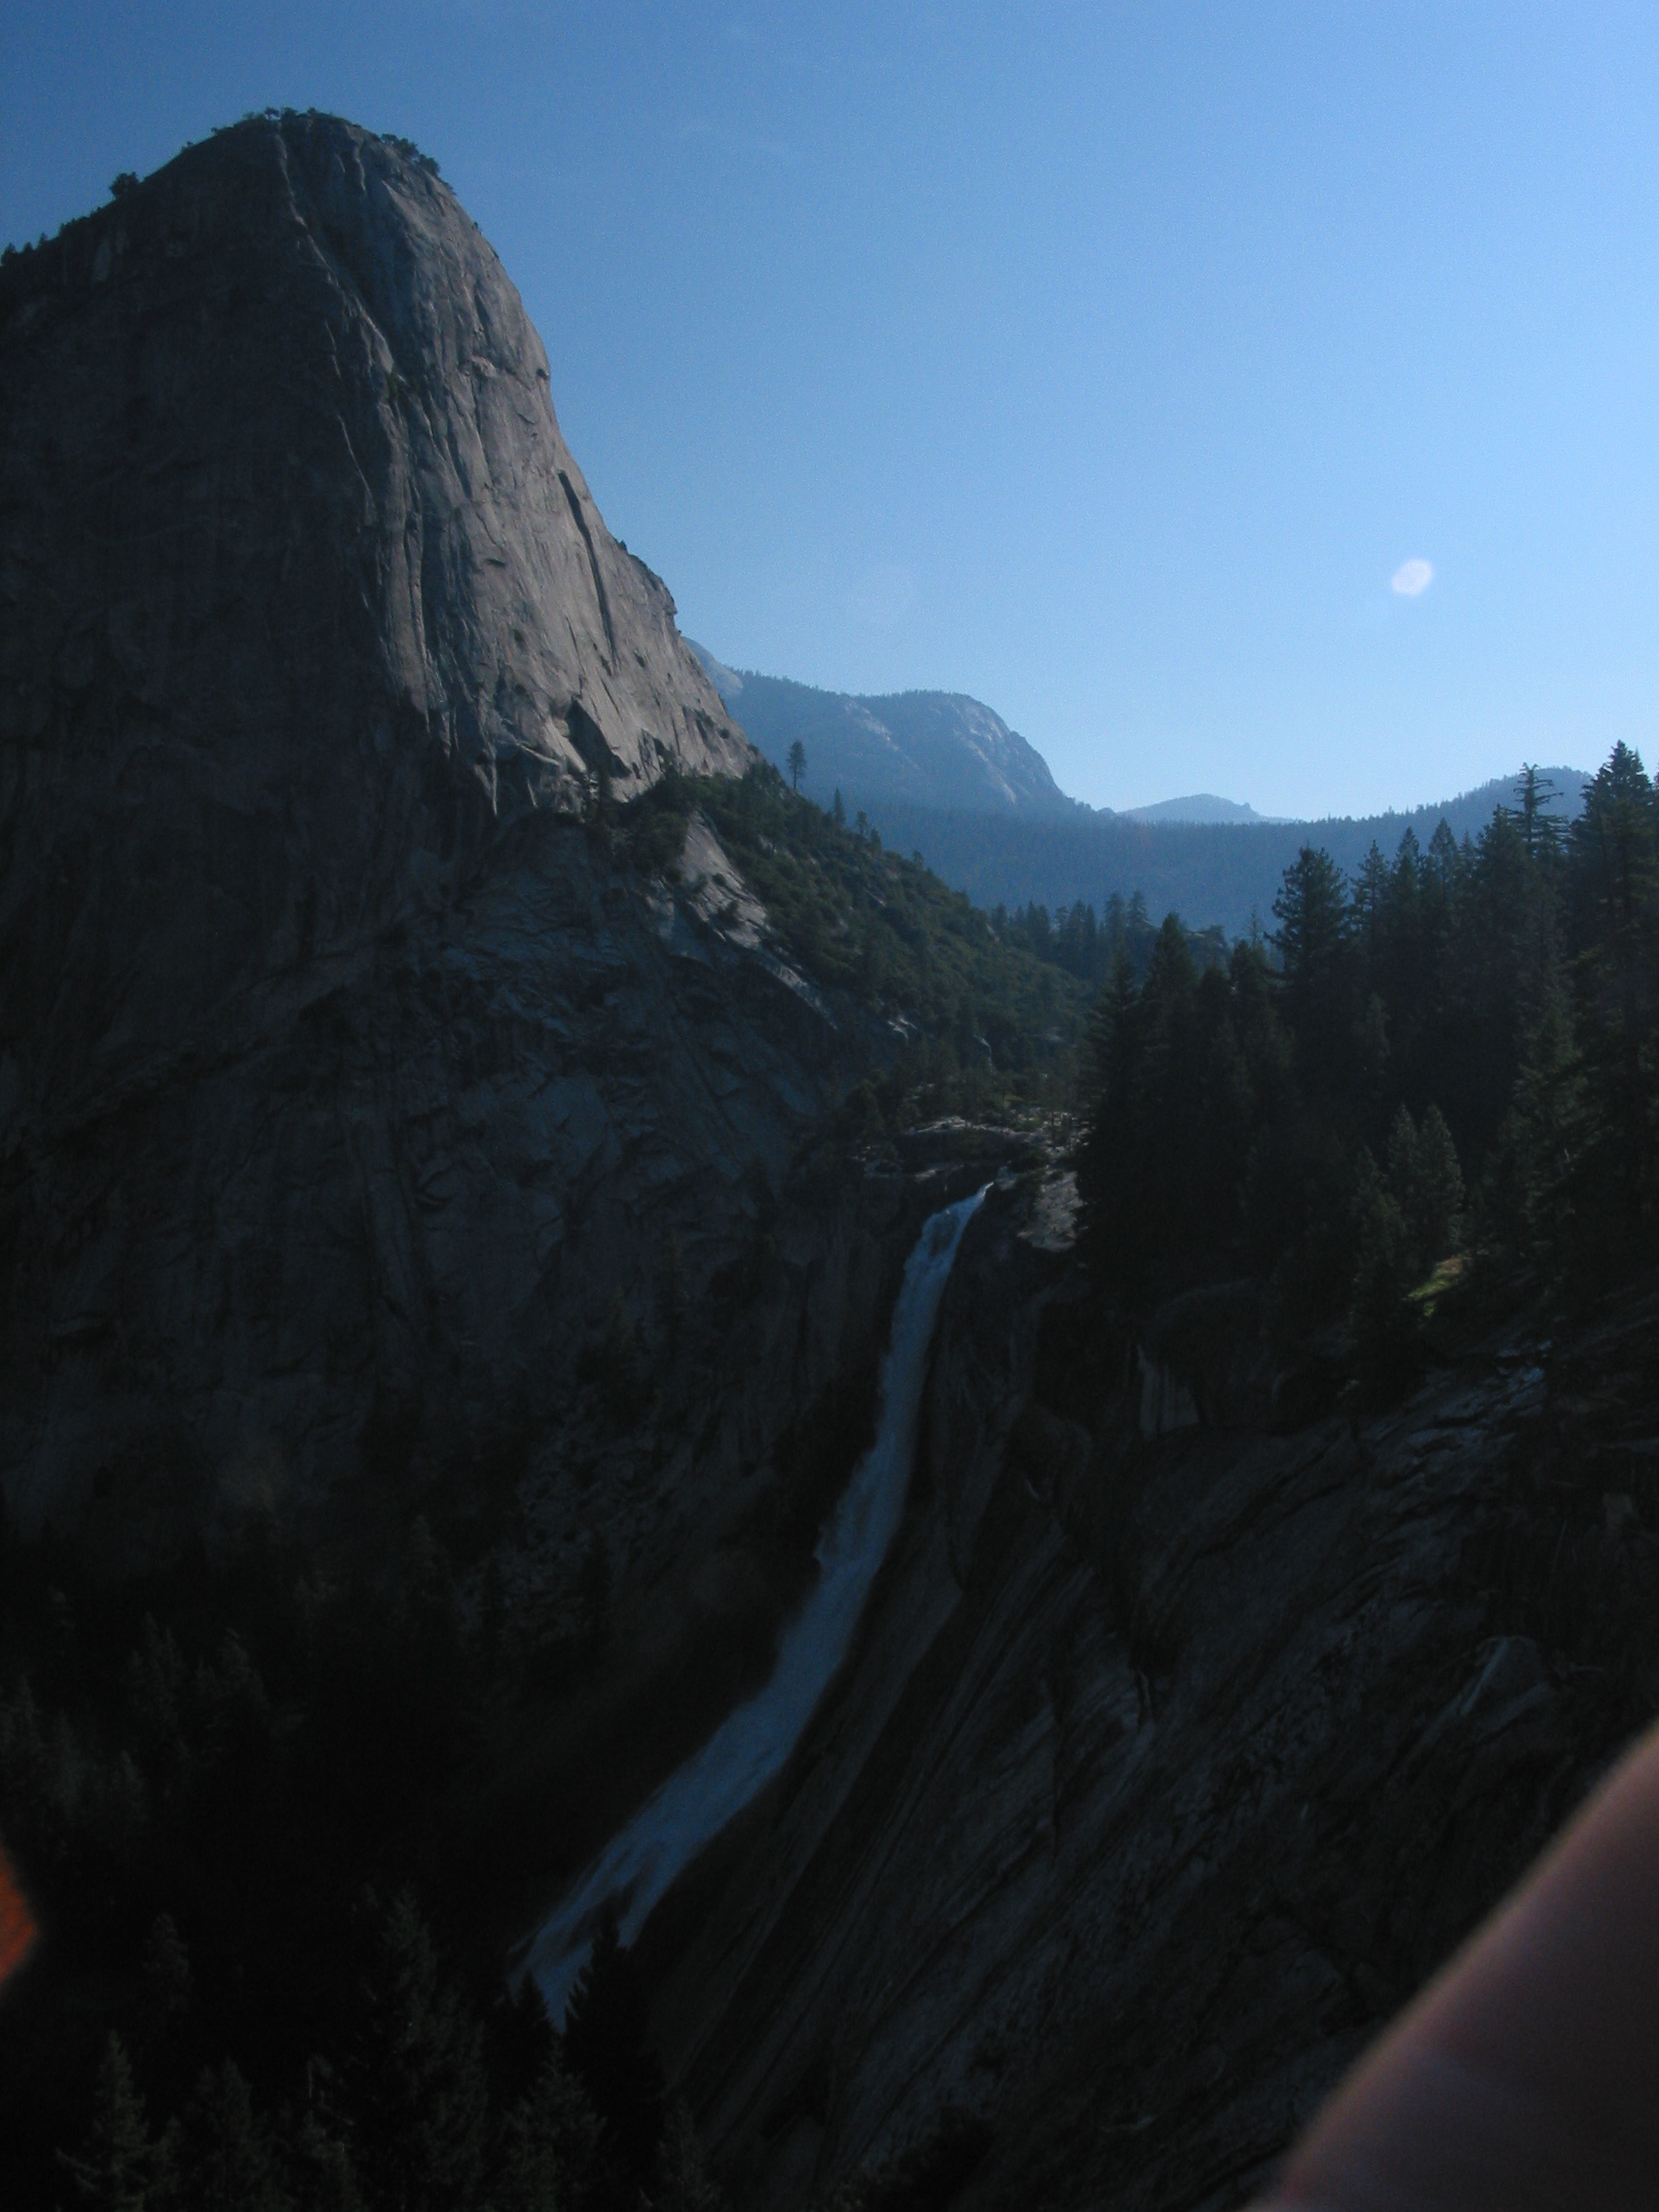 first image from the Half Dome hike (1.5 hours after we got on the trail, and 3 hours after we got up)